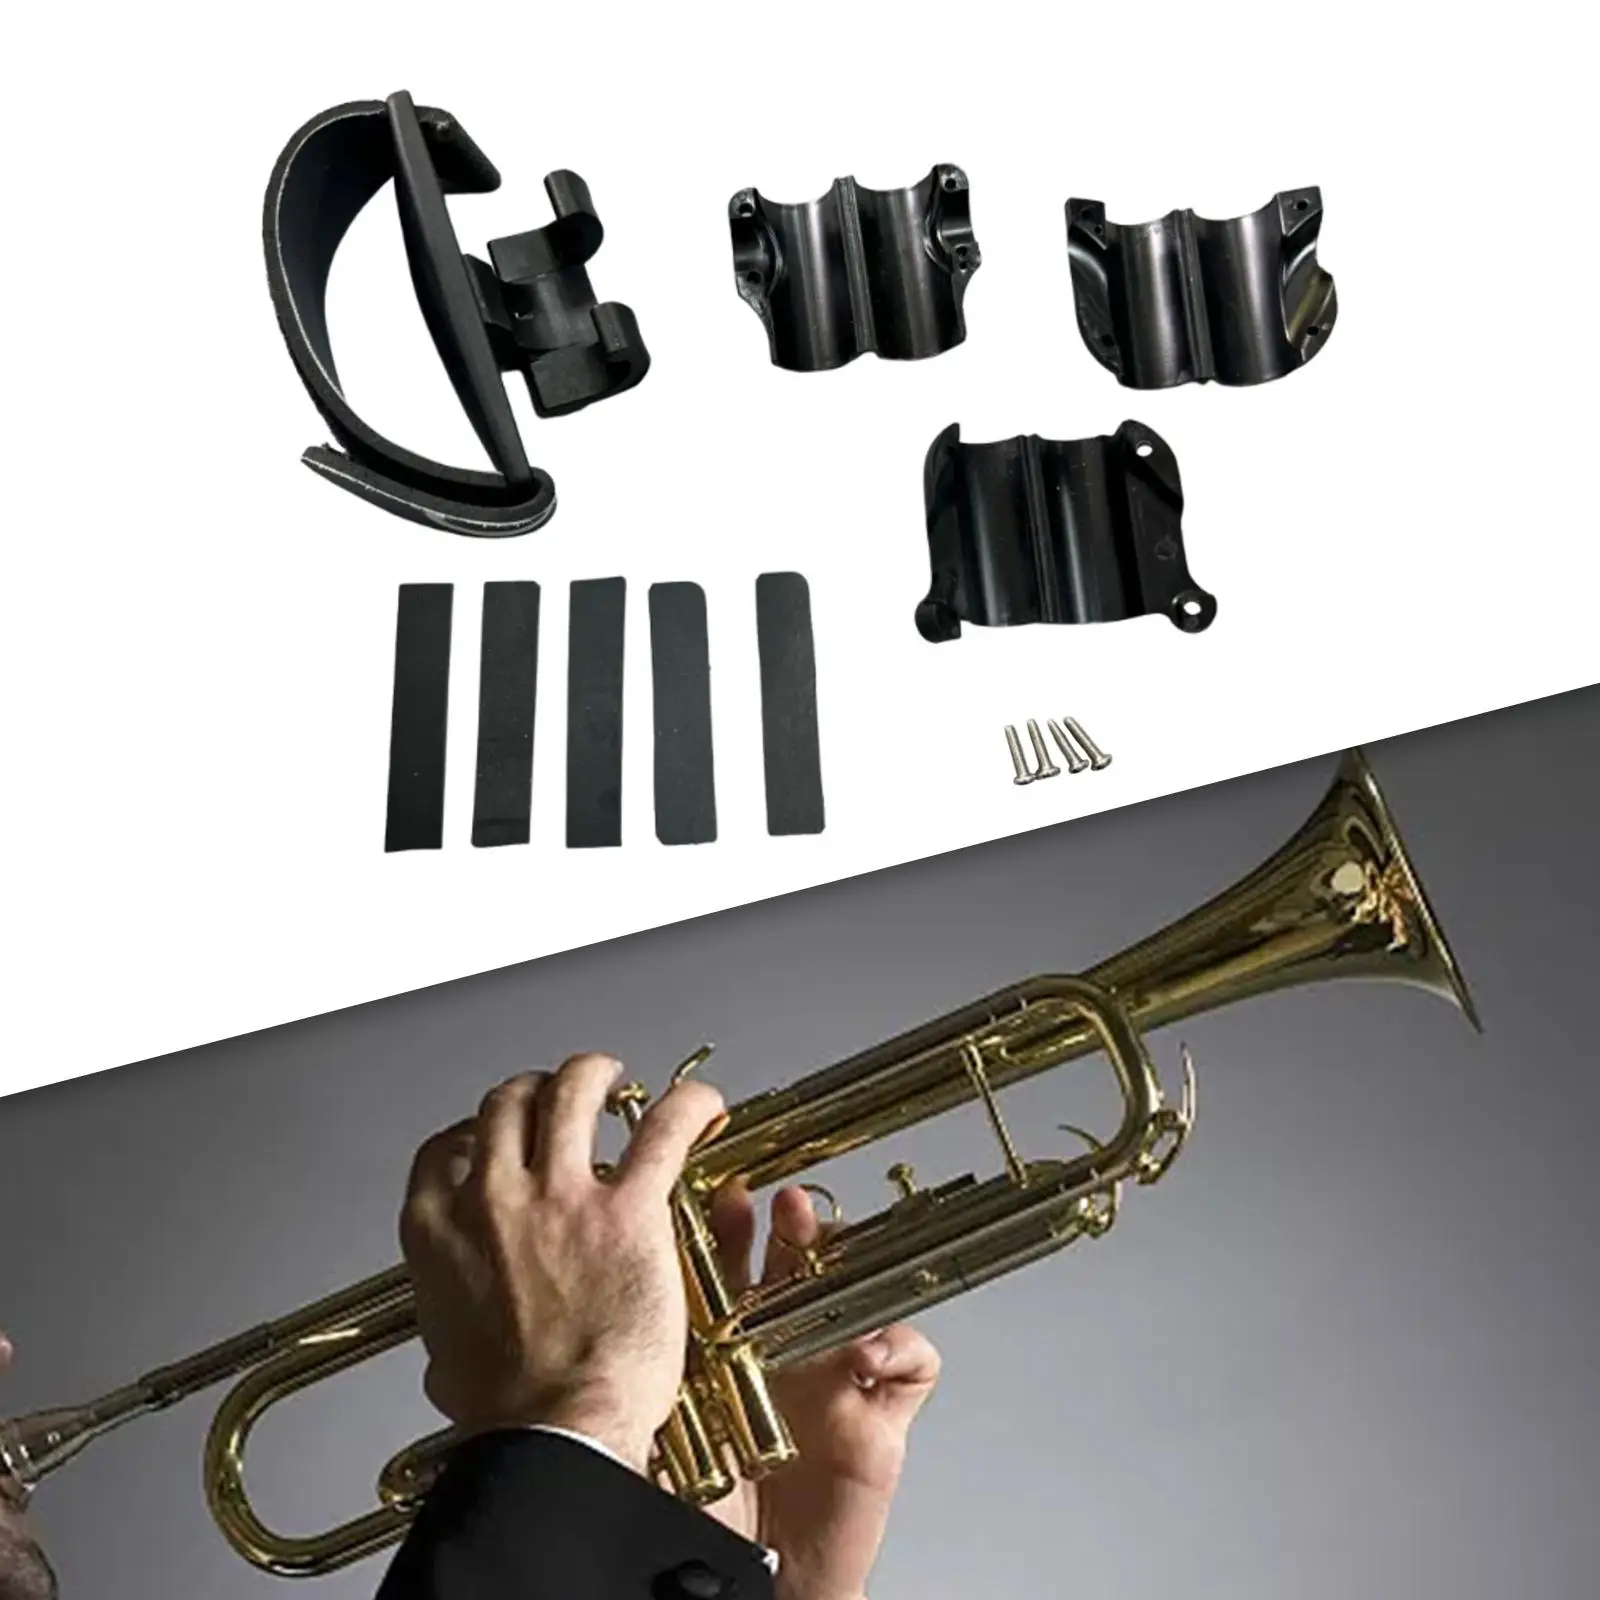 Trombone Grip Maintain A Proper Playing Position Comfortable Universal Guard Practical Cleaning Care Parts Black Wraps